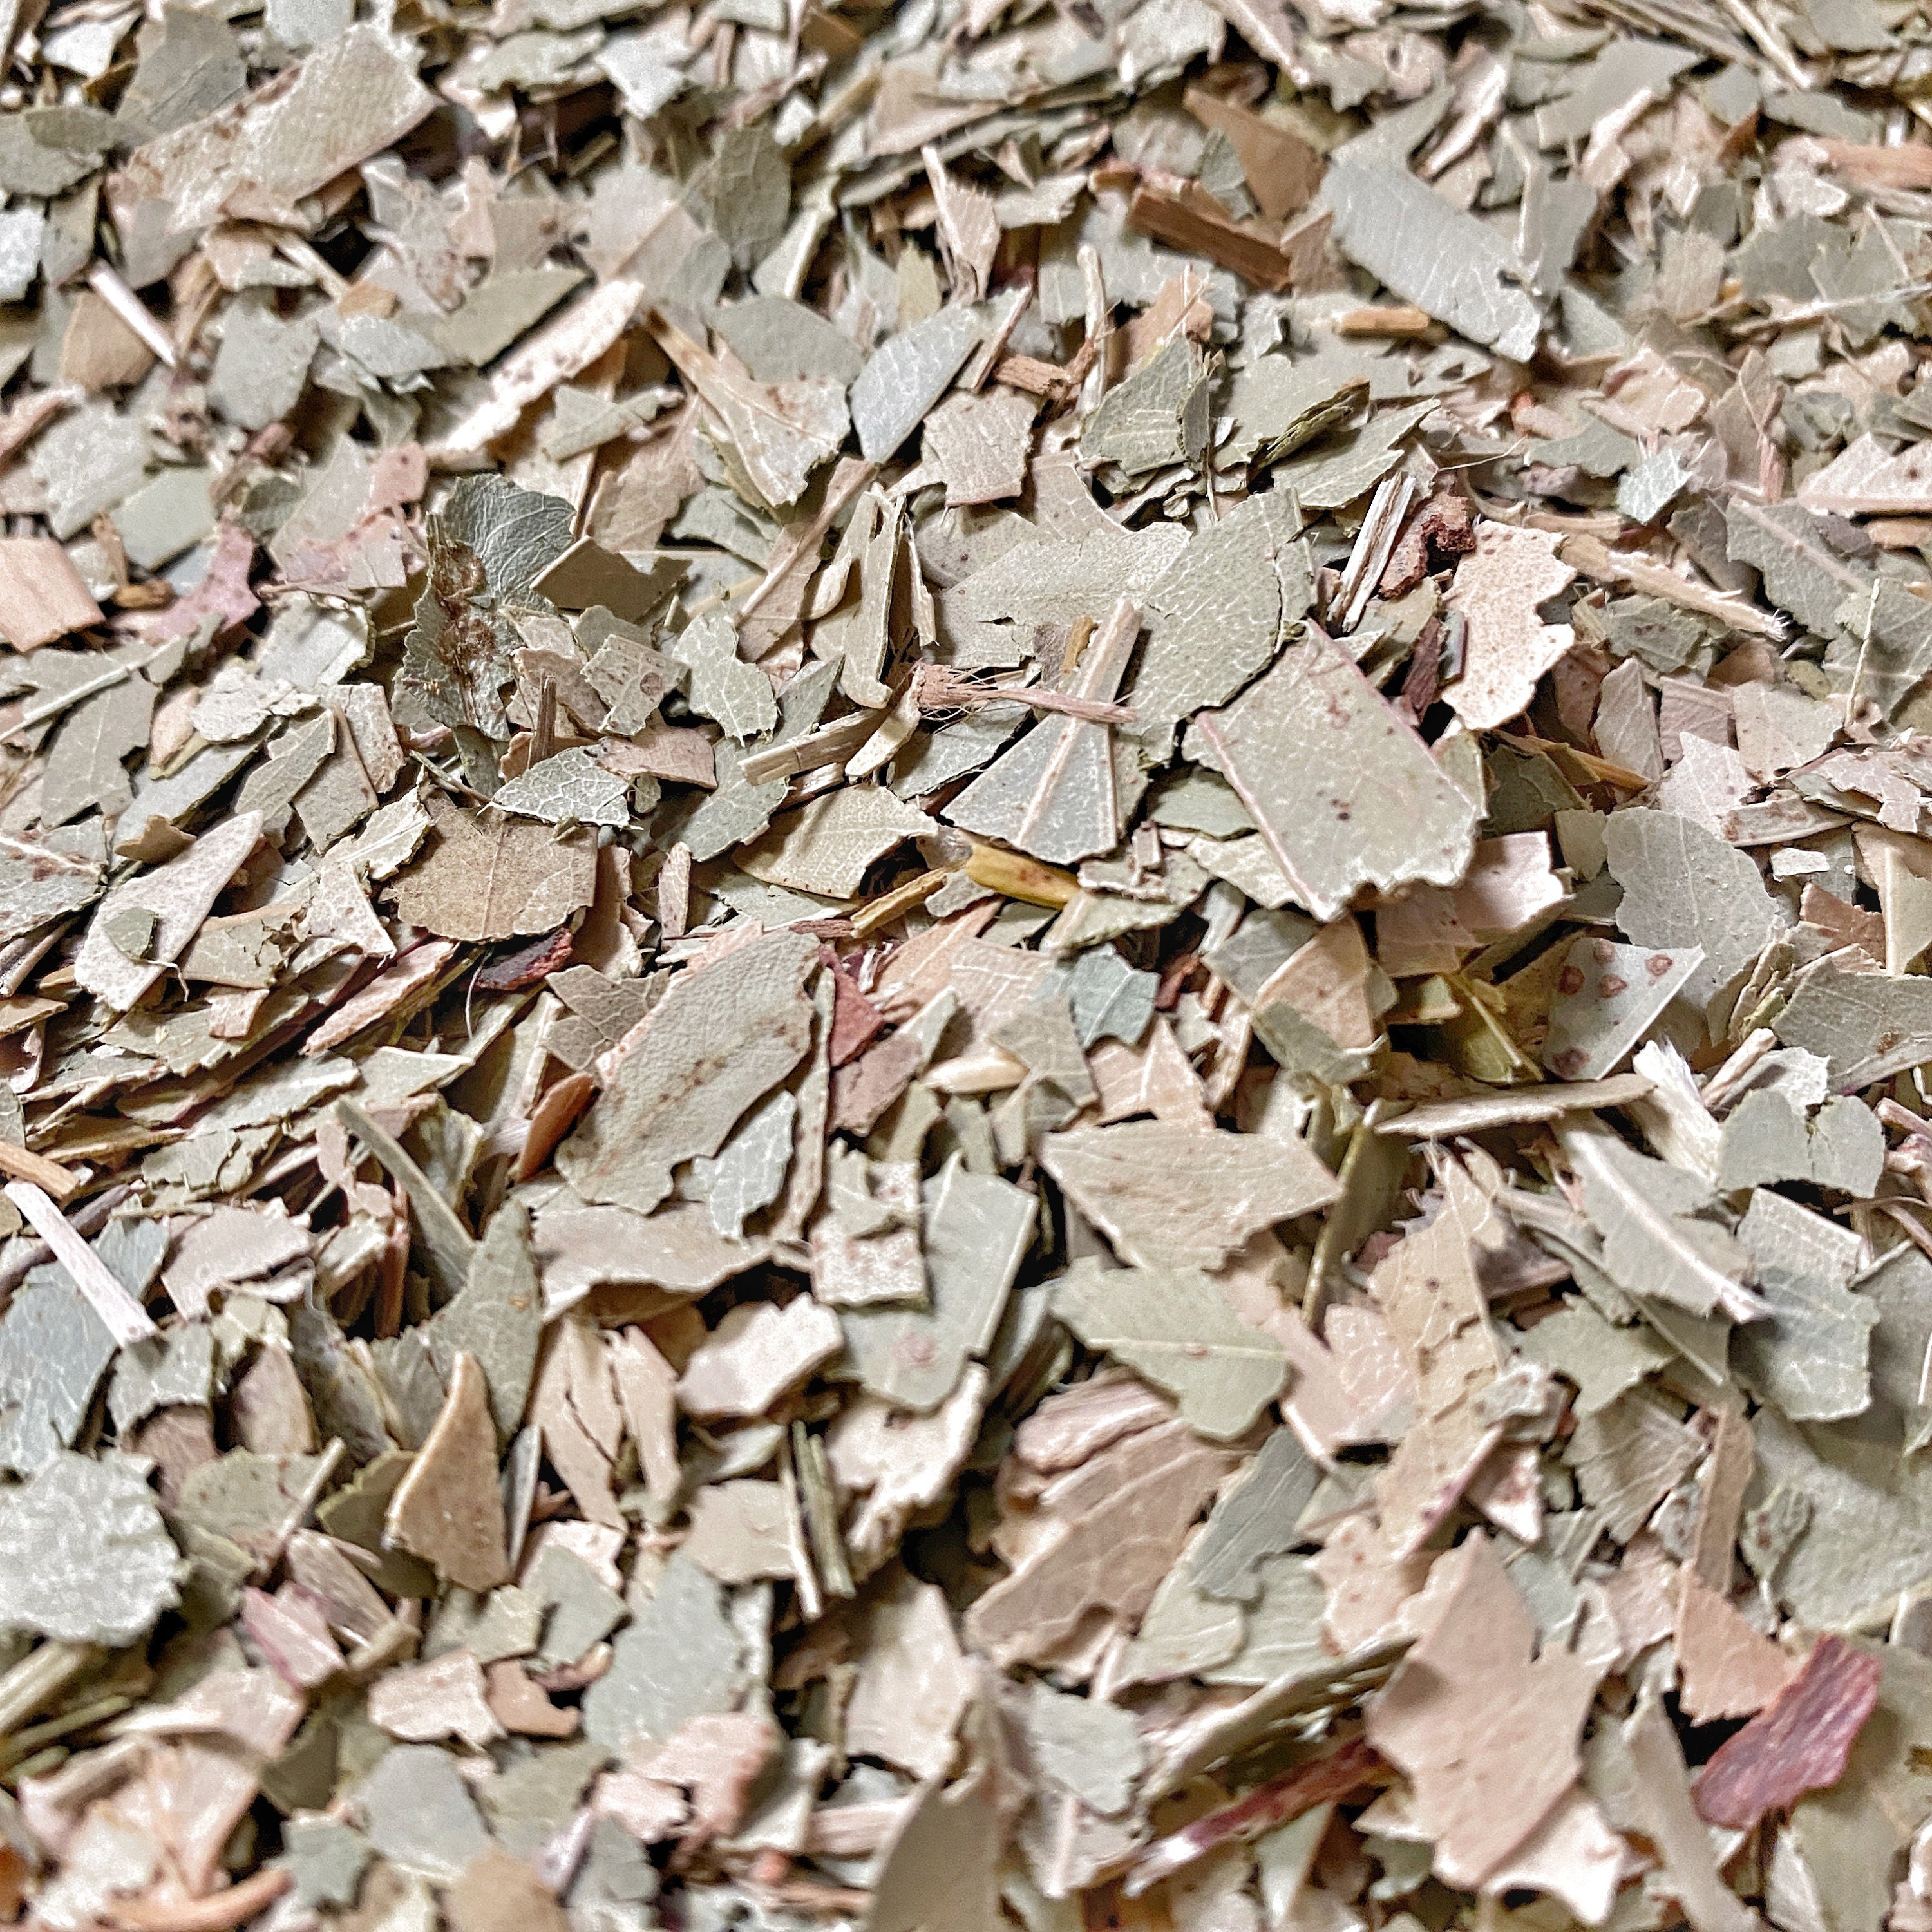 Detail of crushed eucalyptus leaves with a focus on the texture and natural variation in colors from pale green to earthy brown.A close view of chopped eucalyptus leaves, with detailed texture and color variation, suitable for herbal uses.